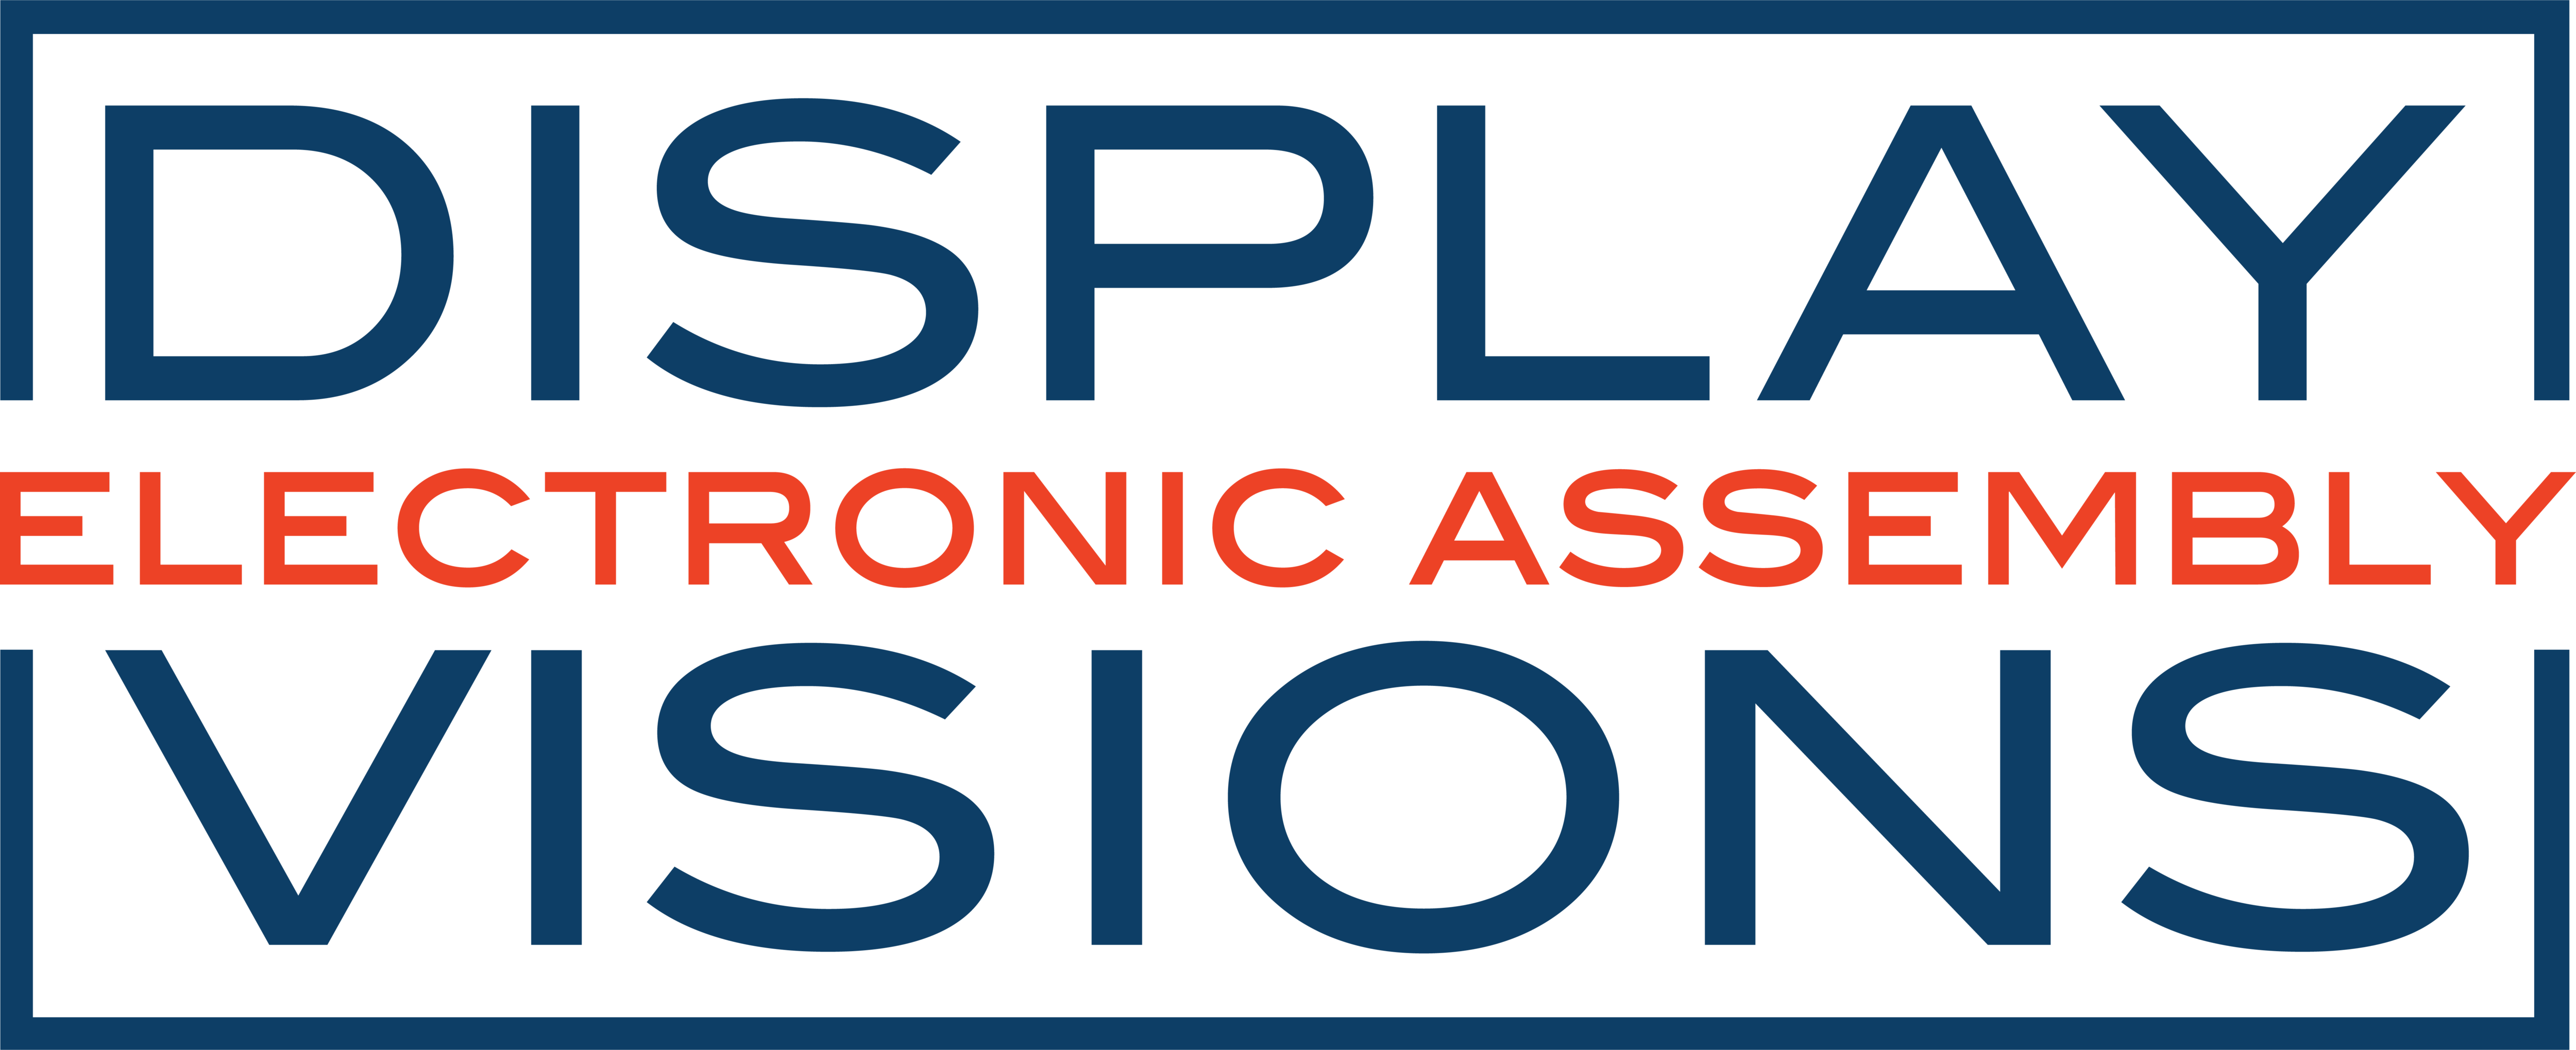 Electronic Assembly (Display Visions) LOGO